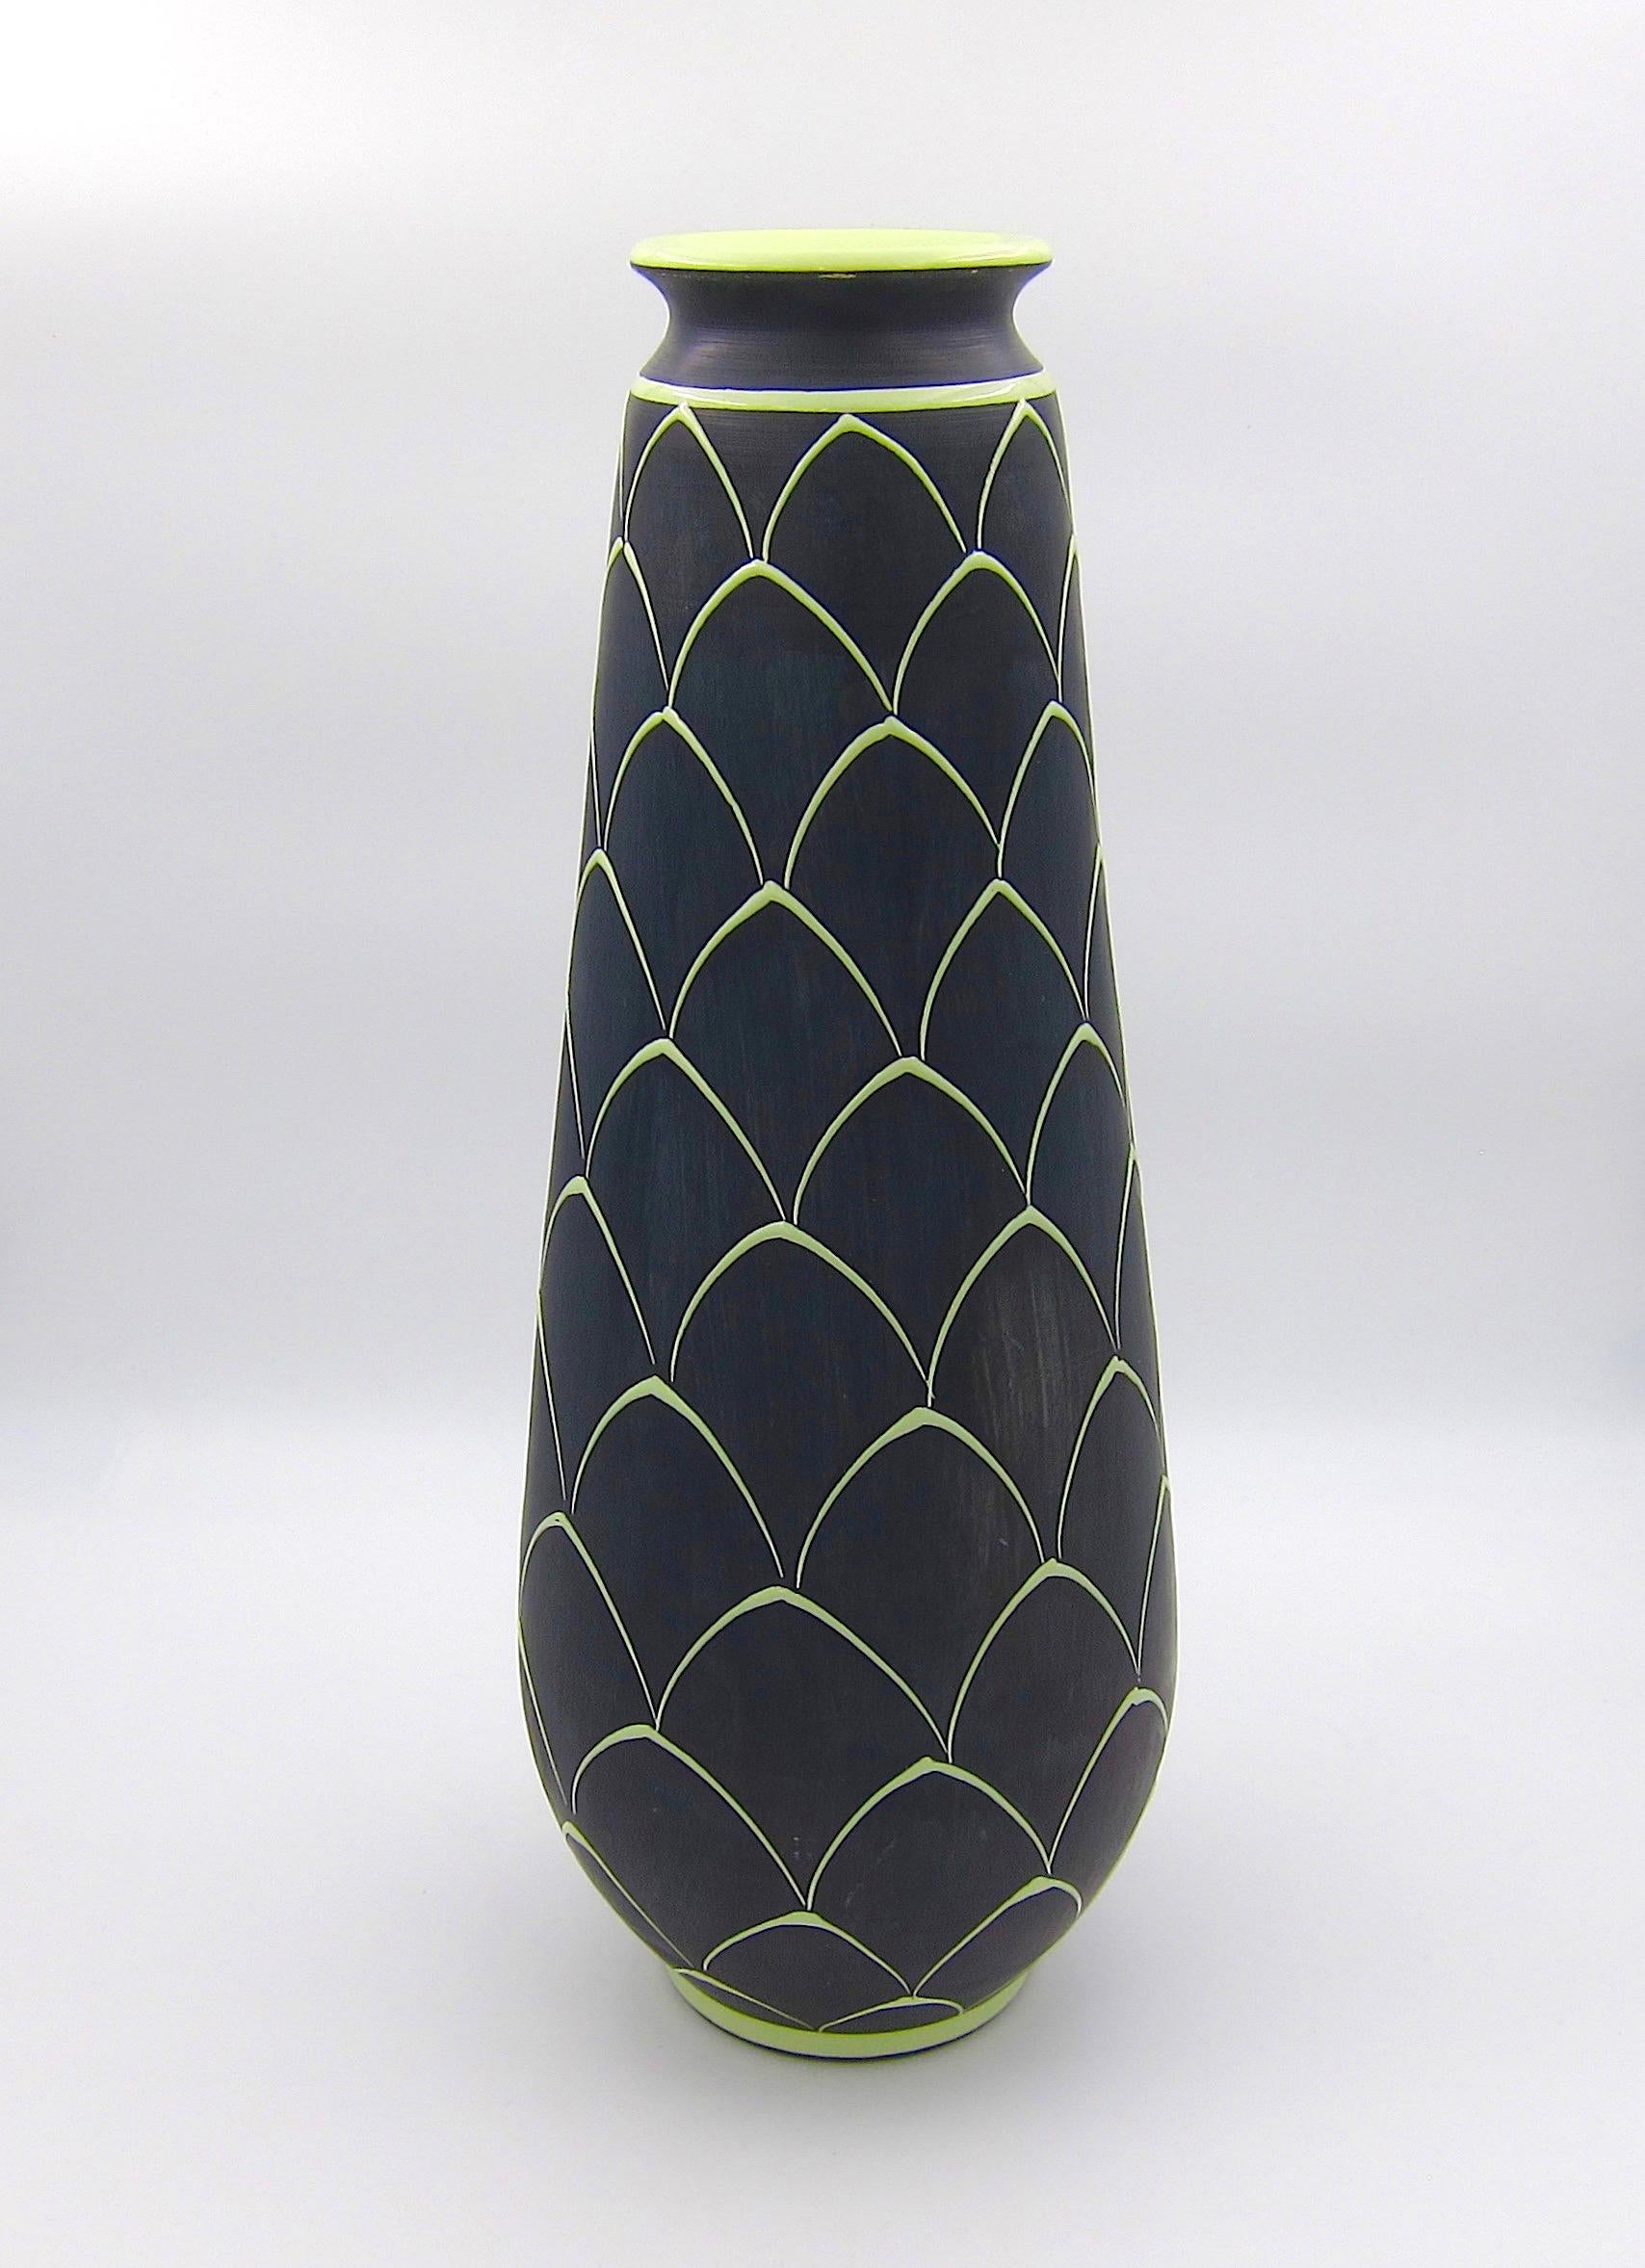 A tall midcentury Larholm Keramikk vase, made in Norway during the 1950s. This elegant Studio Pottery vessel was designed with a Scandinavian Modern simplicity that would also compliment an Art Deco decor scheme. 

The vase is of elongated form with